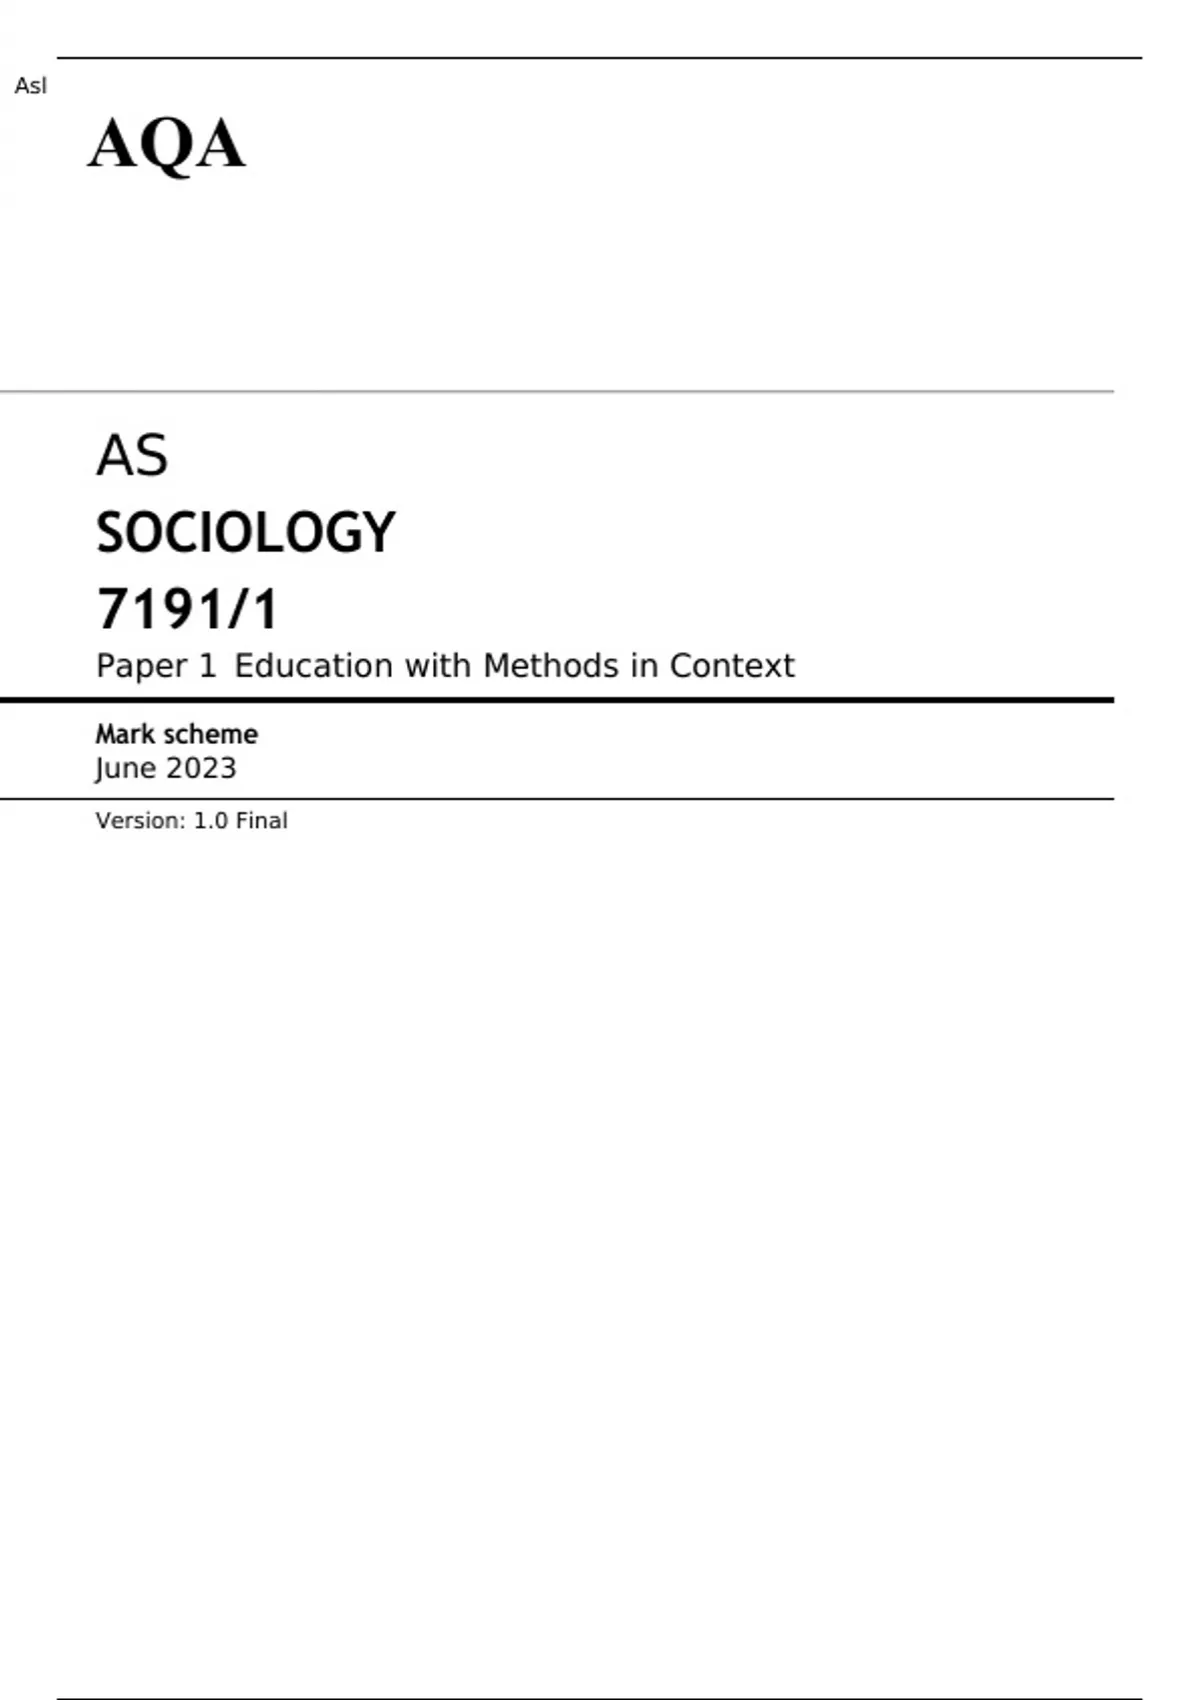 as sociology paper 1 education with methods in context